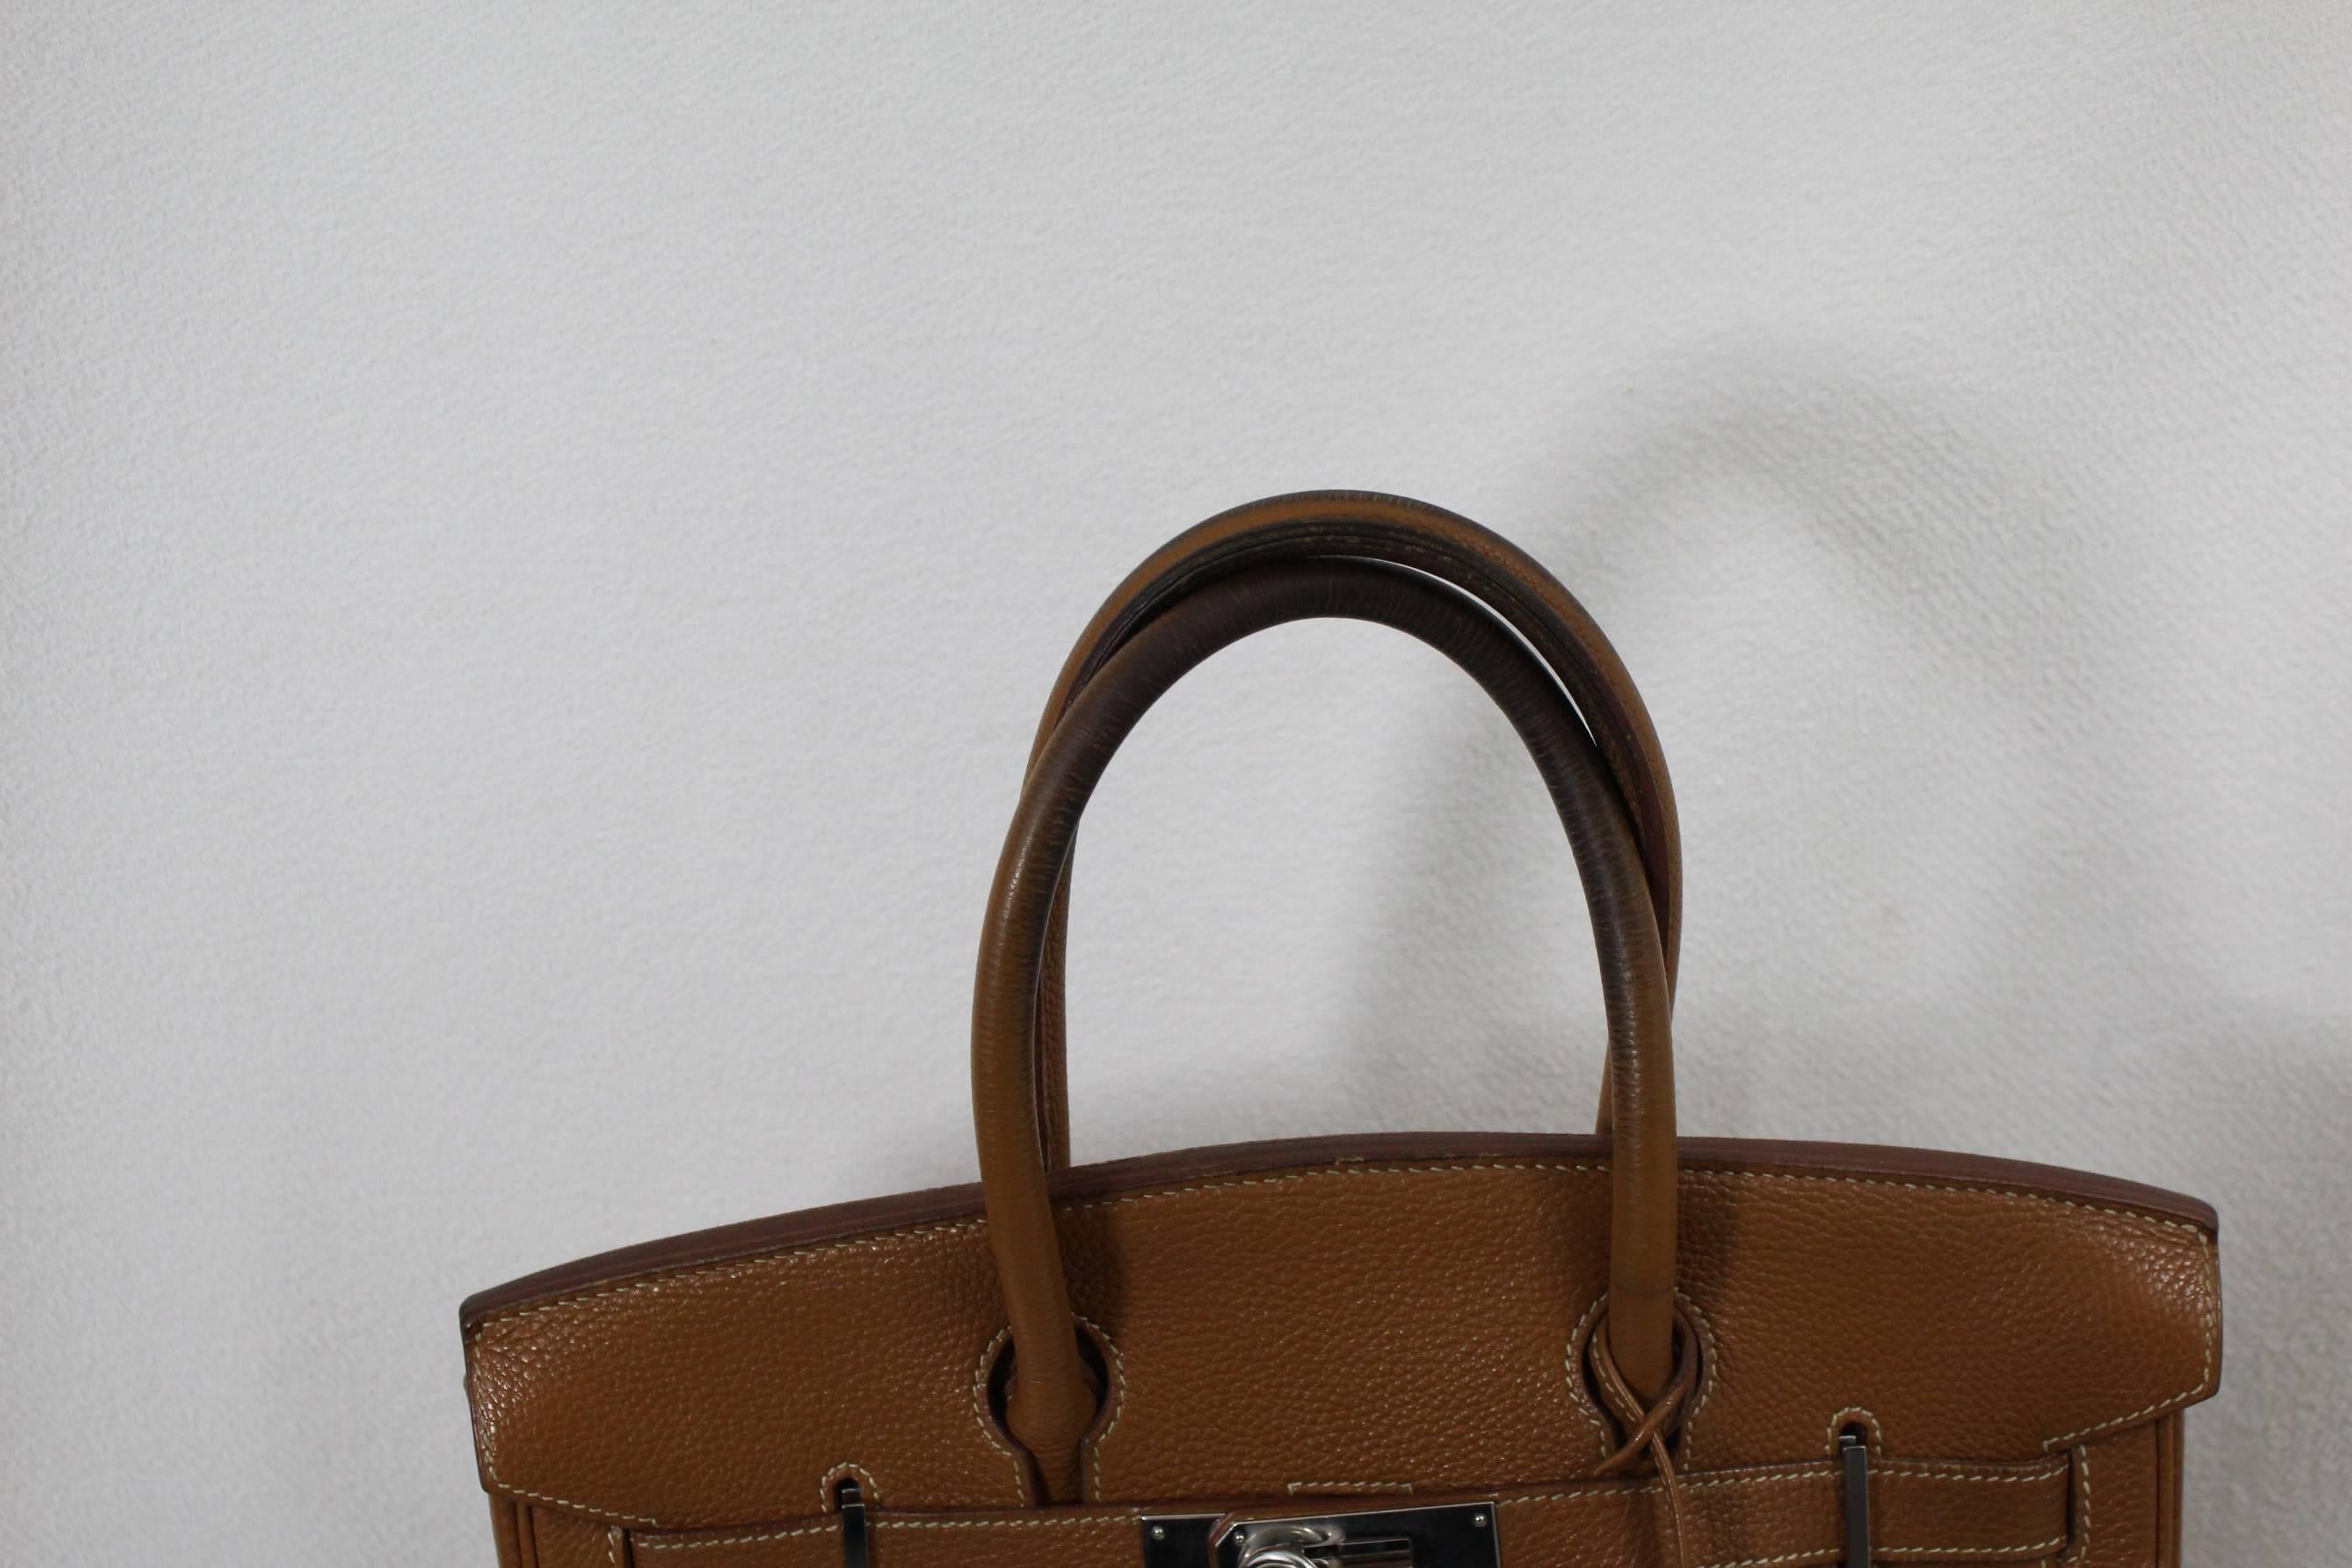 Nice Hermes Birkin 30 bag in gold leather and siver hardware.

Bag in fait condition cause the corners are damaged ( see images) so the prrice take this into account and it can be brought to the Hermes Spa to get it as new

haandles prresents also